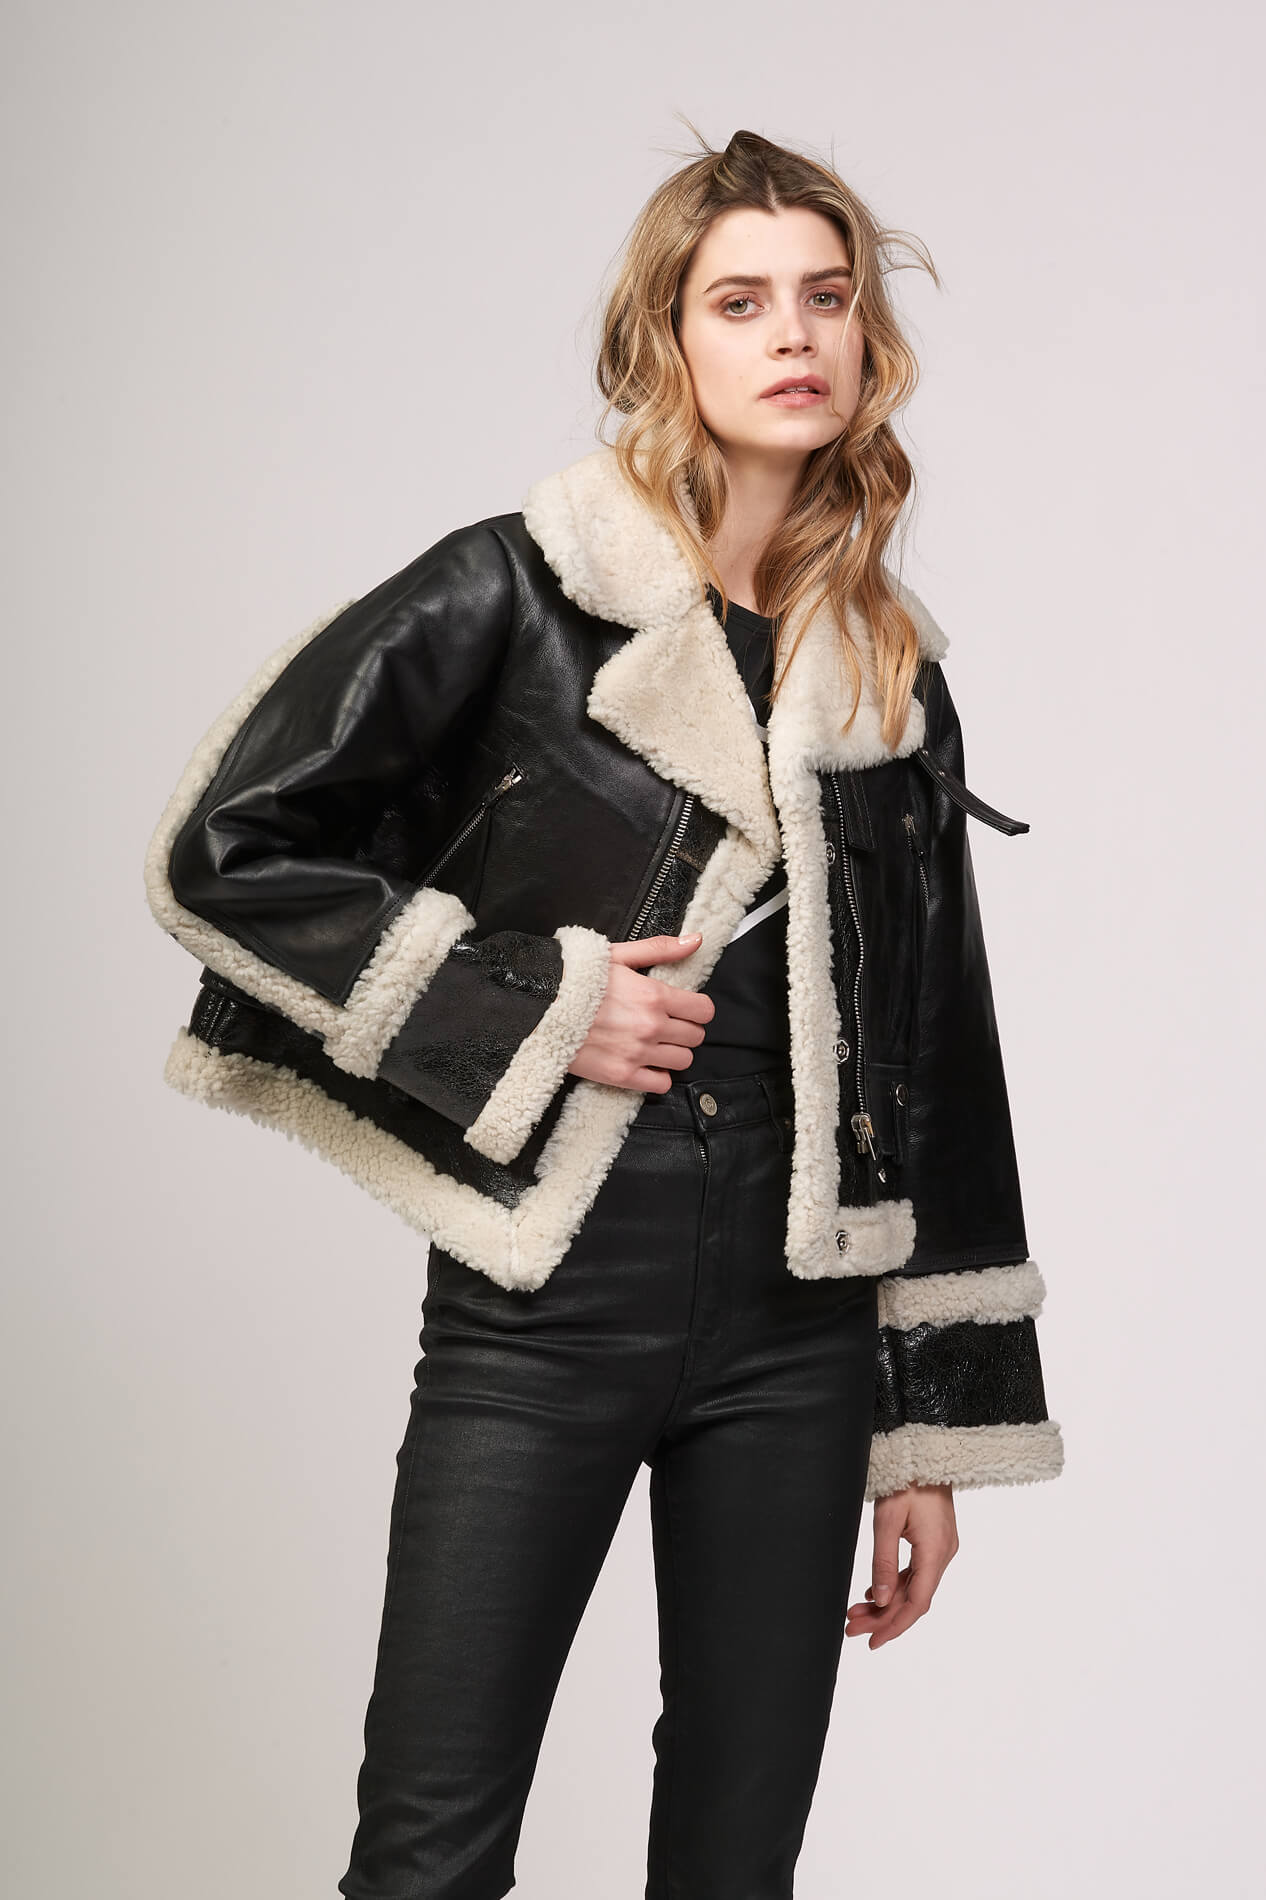 LOU SHEARLING Black leather jacket. Lining, contour and lapels in white shearling. Frontal buttons. Wrist bands with buttons. 2 side pockets. 100% sheepskin. Made in Italy. HTC LOS ANGELES